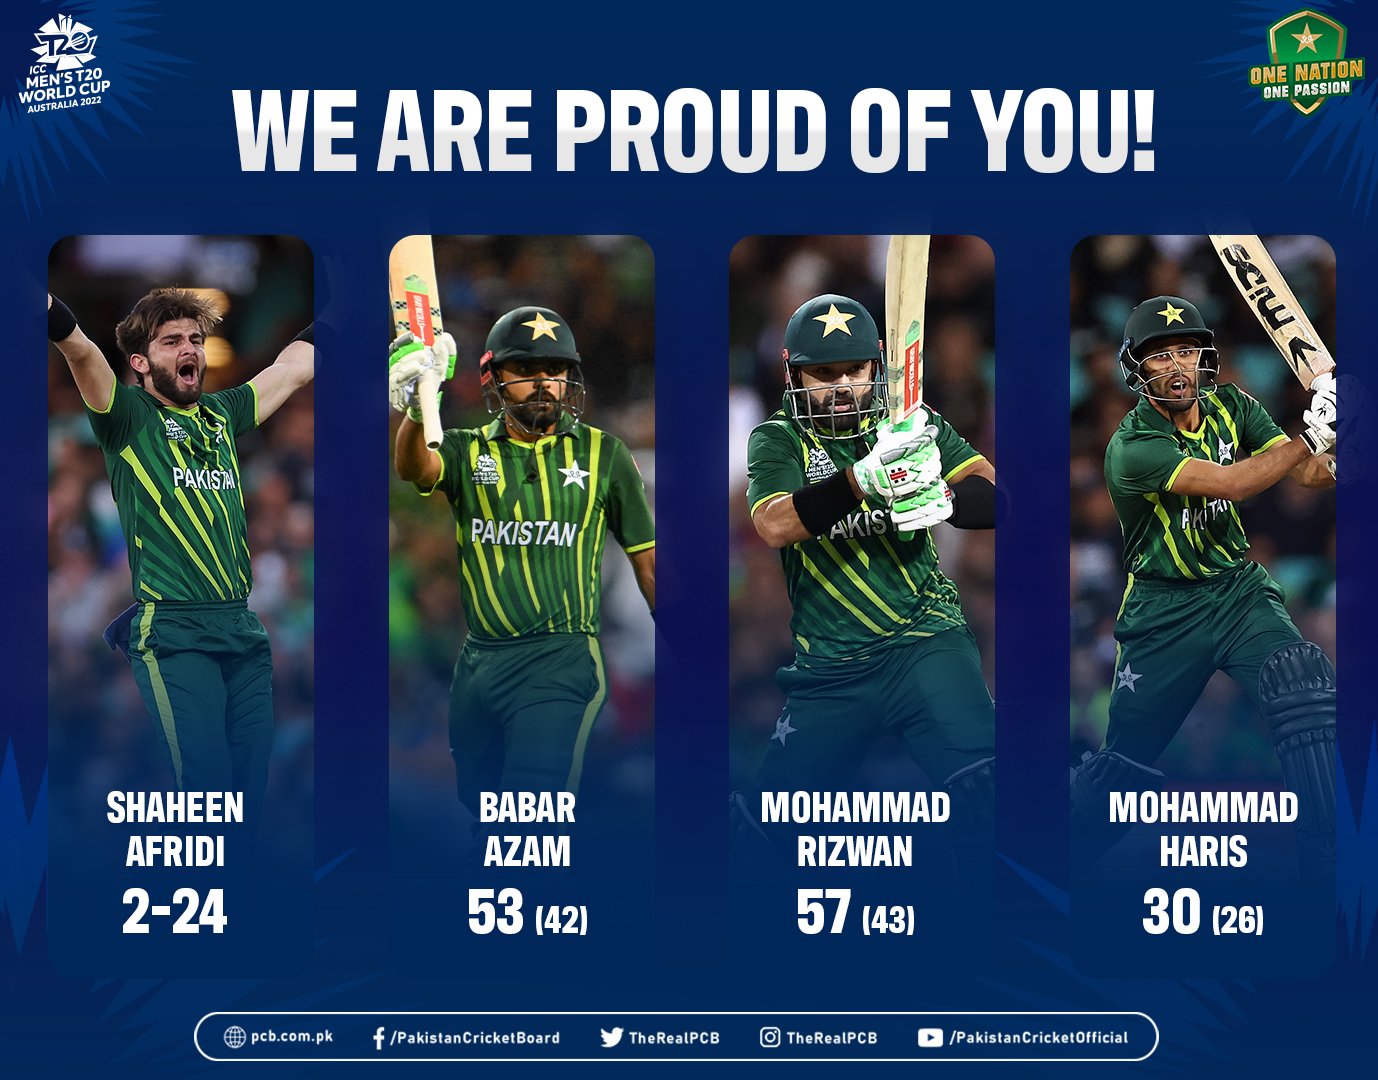 The duo of Babar and Rizwan has achieved another important record